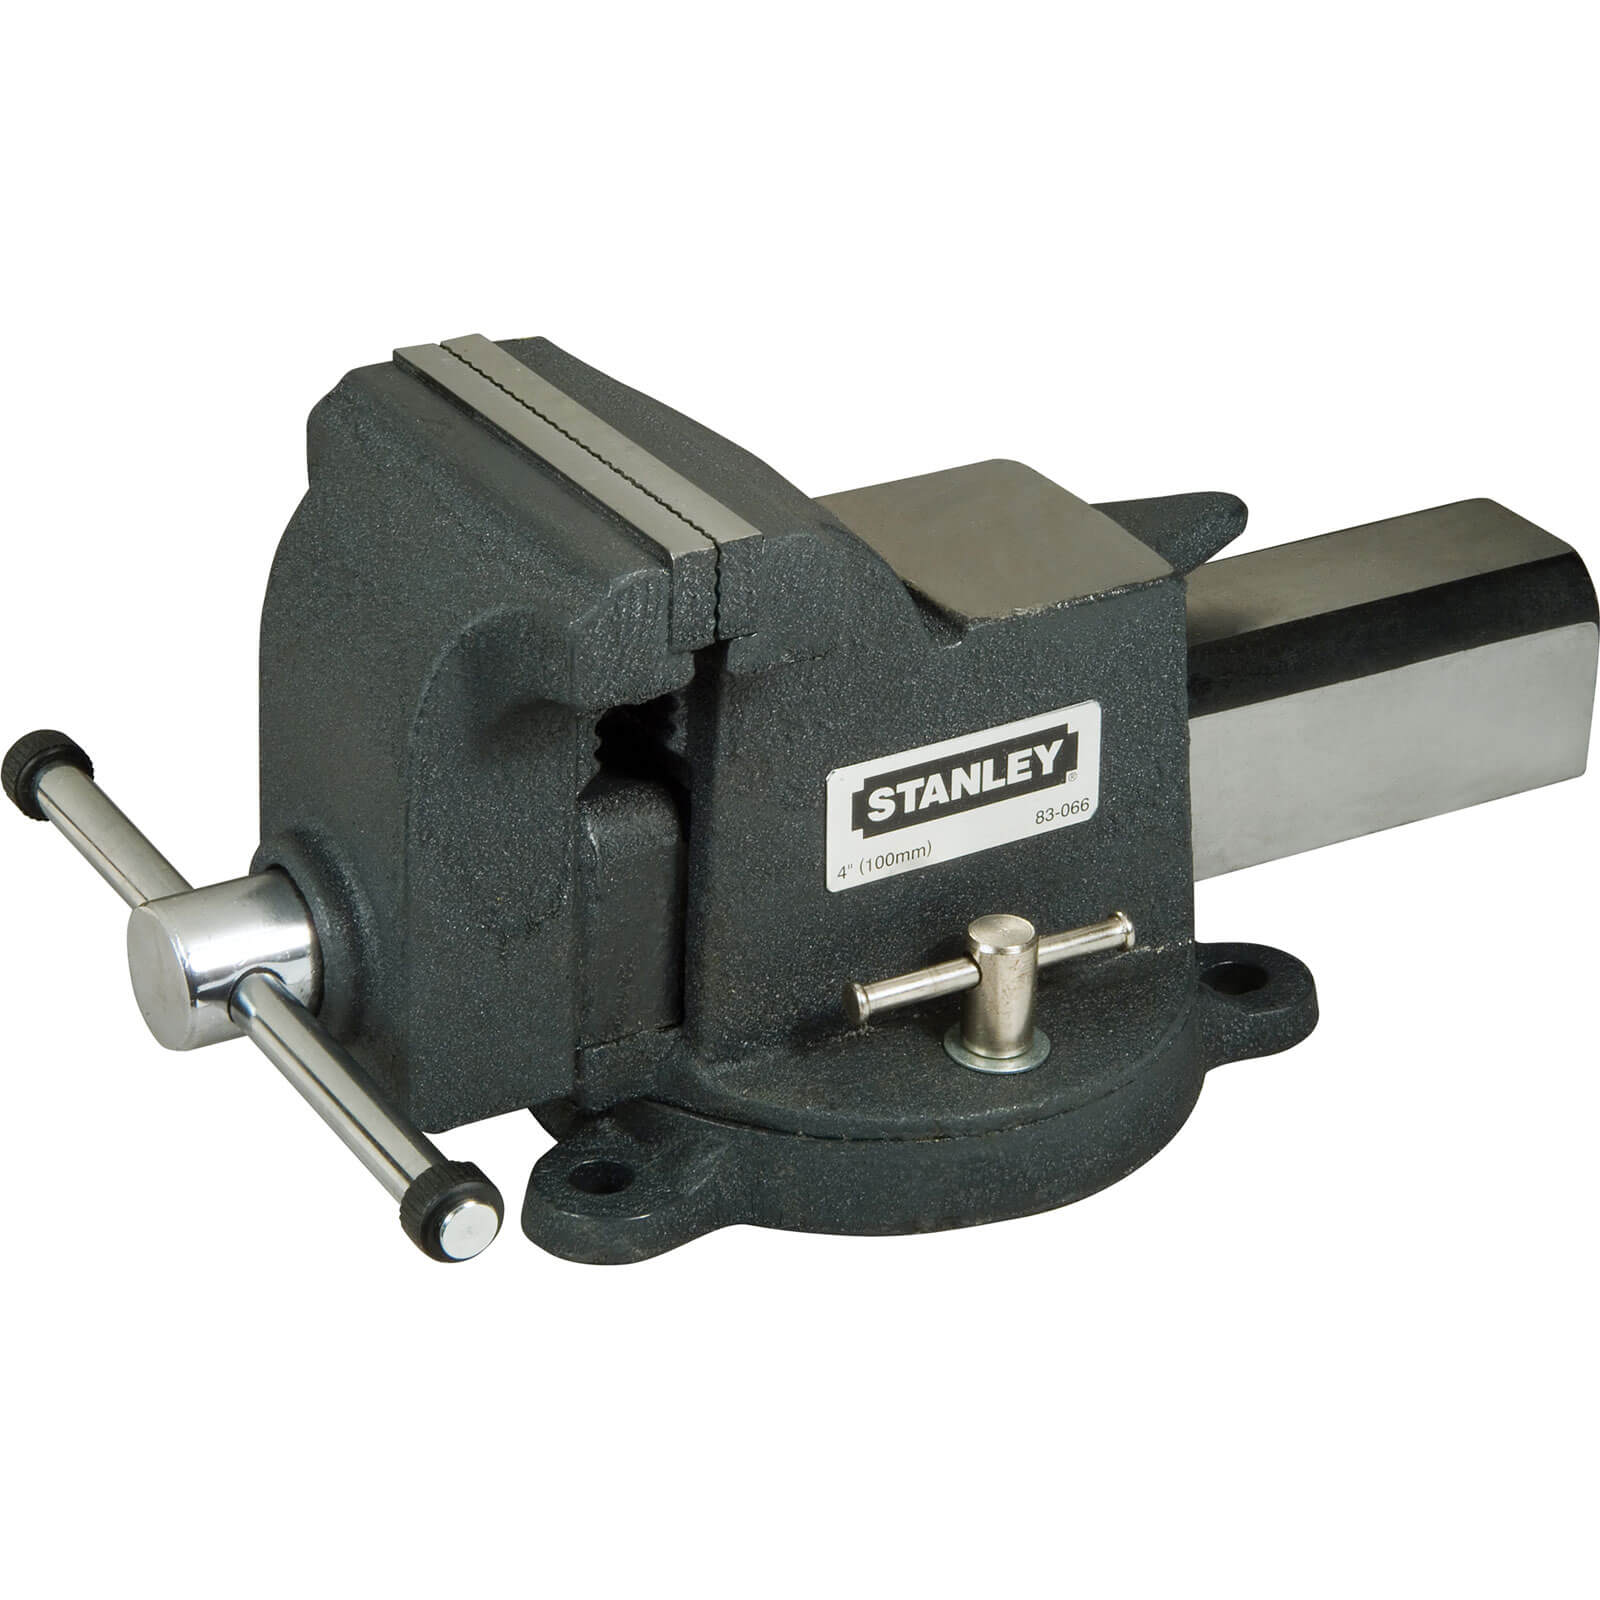 Image of Stanley Heavy Duty Bench Vice 125mm